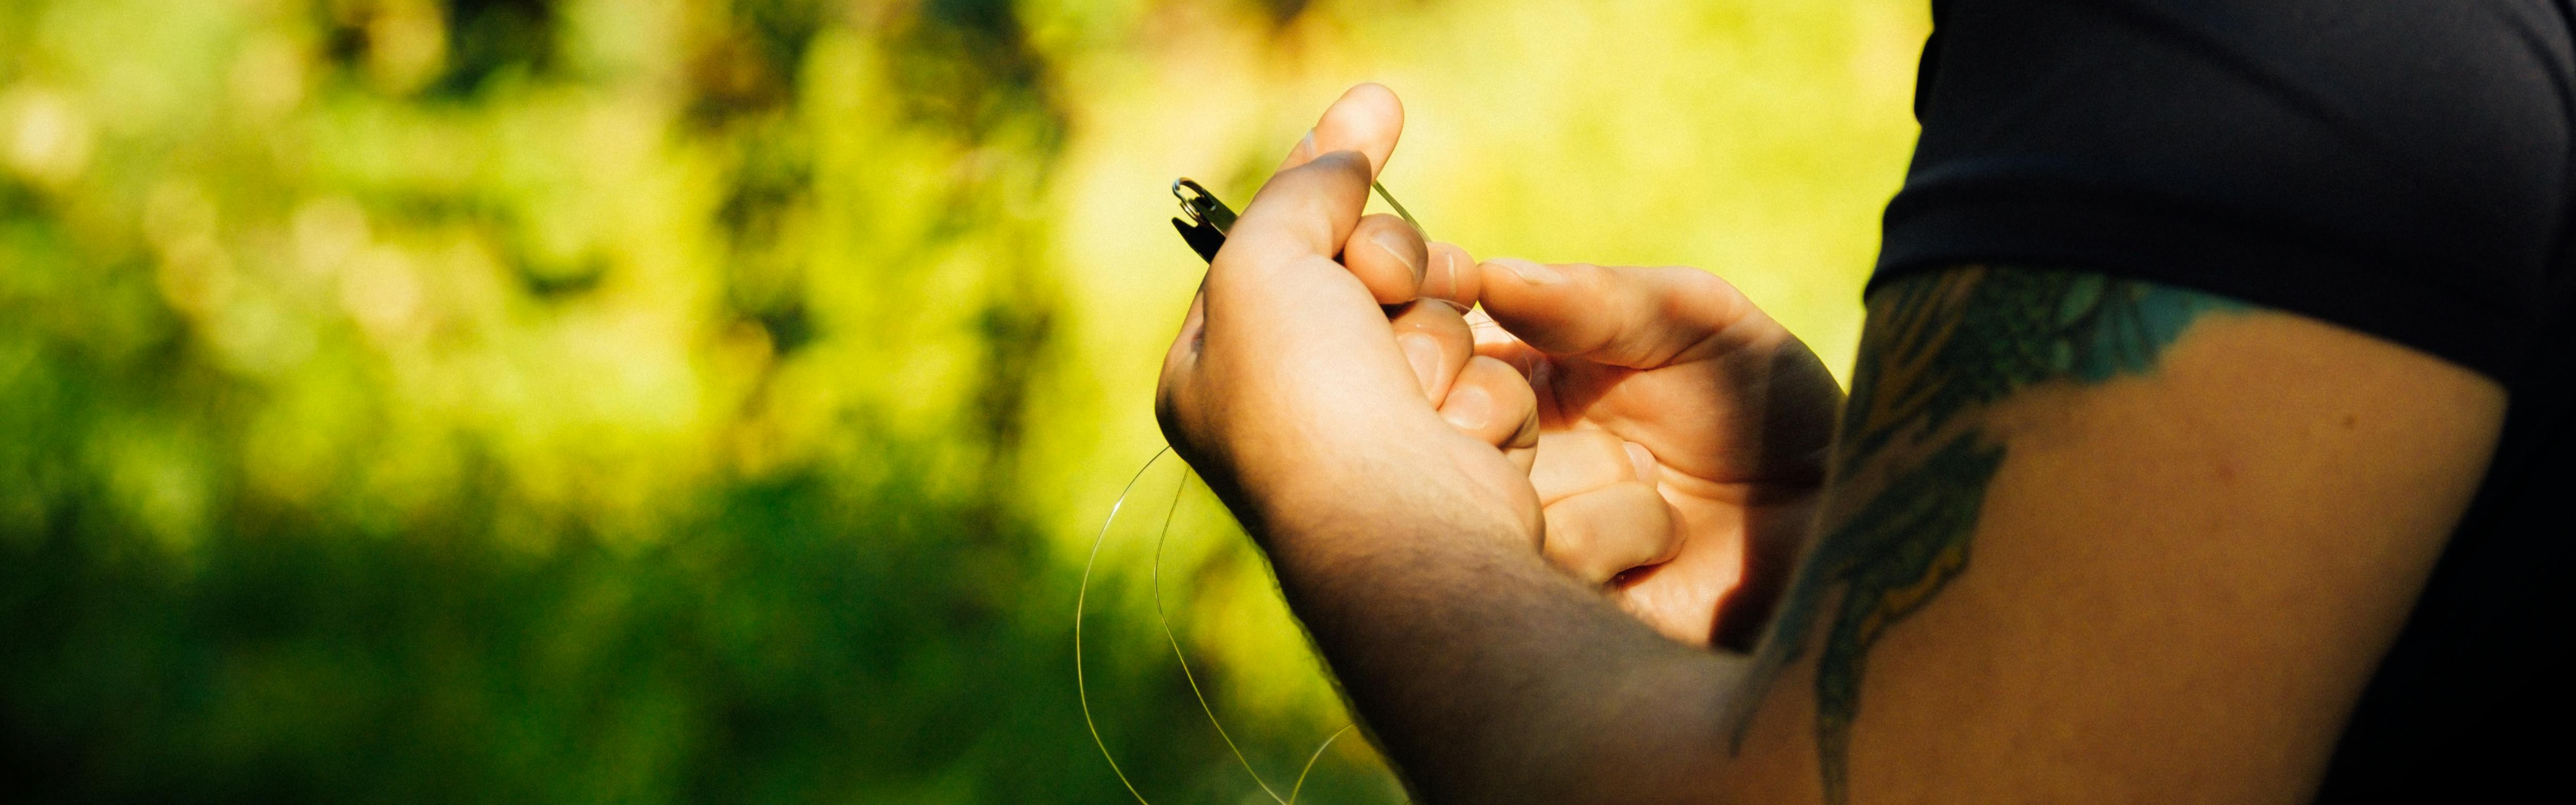 A man holds fishing line in his hands against a green background of foliage. 